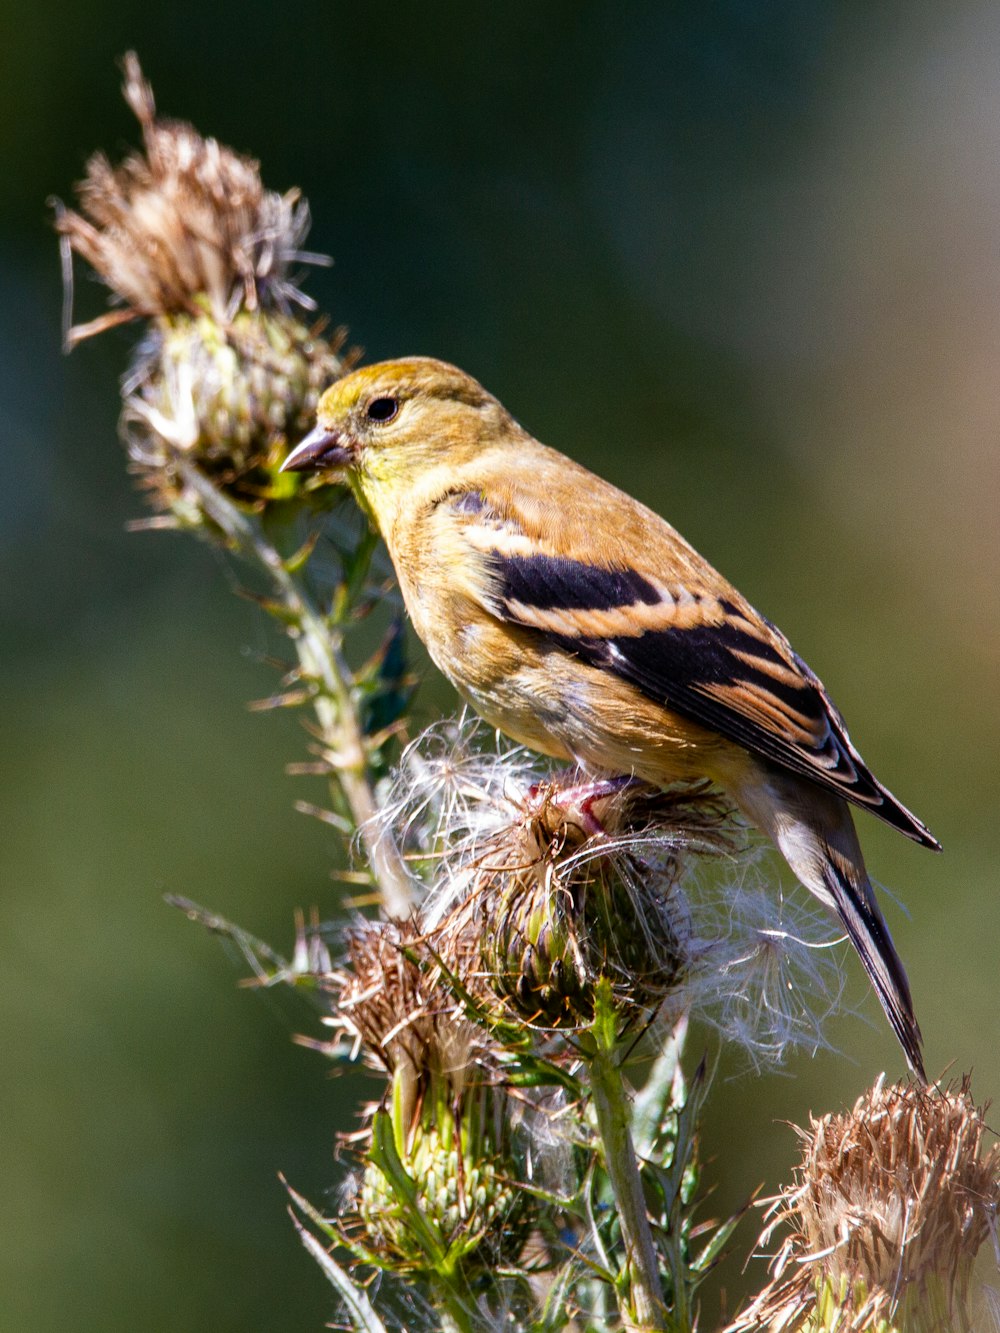 yellow and black bird on brown plant